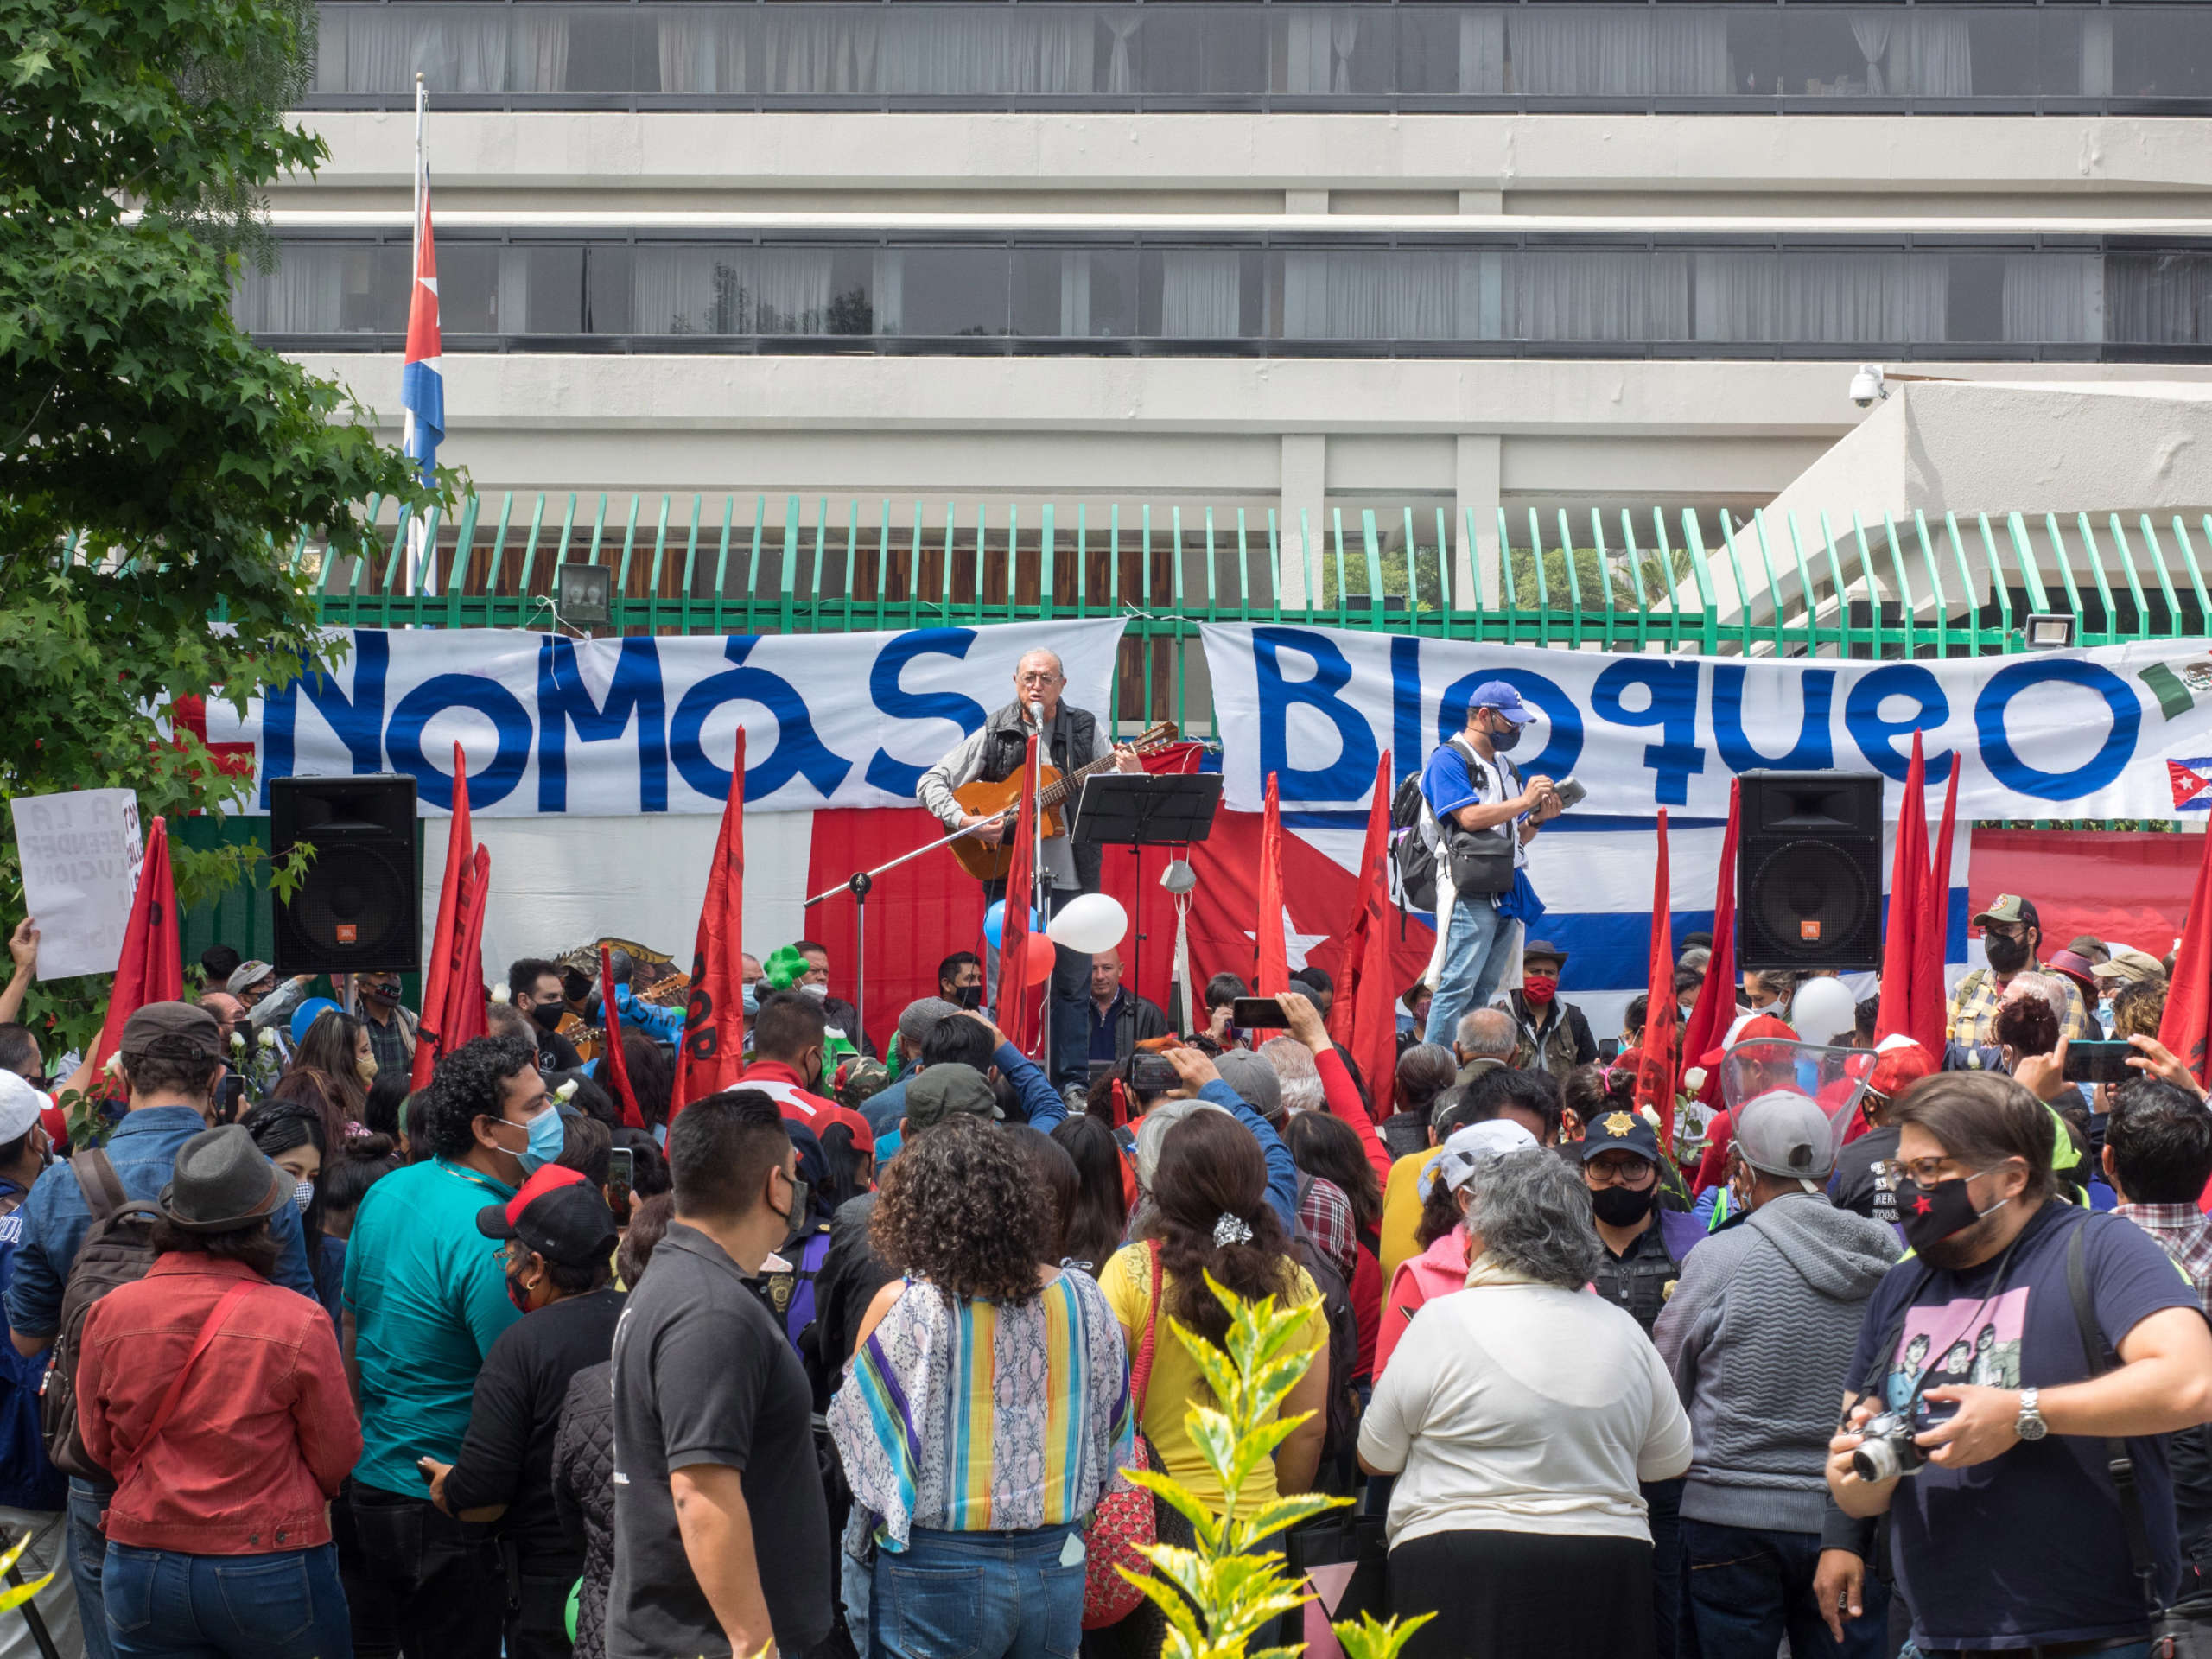 An artist performs a song for the crowd at the Cuban embassy in Mexico in front of a banner that reads "No More Blockade" on July 17, 2021.